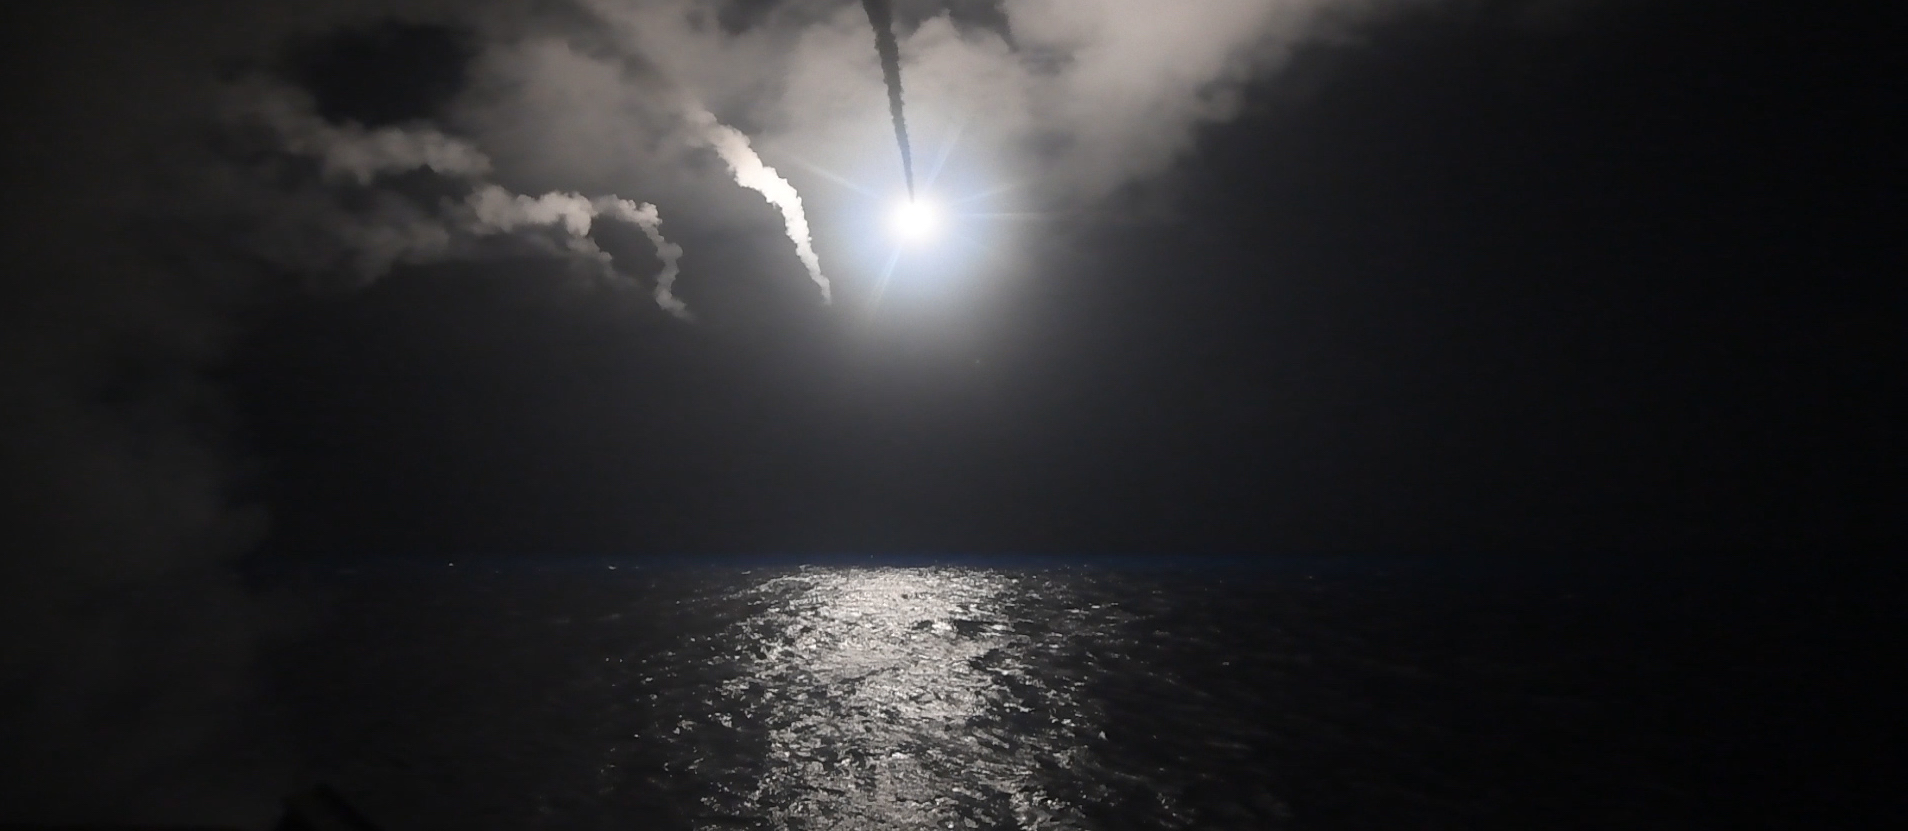 Tomahawk missiles fired by the USS Porter at an airfield in Syria, April 2017 (Photo: Getty Images/US Navy)